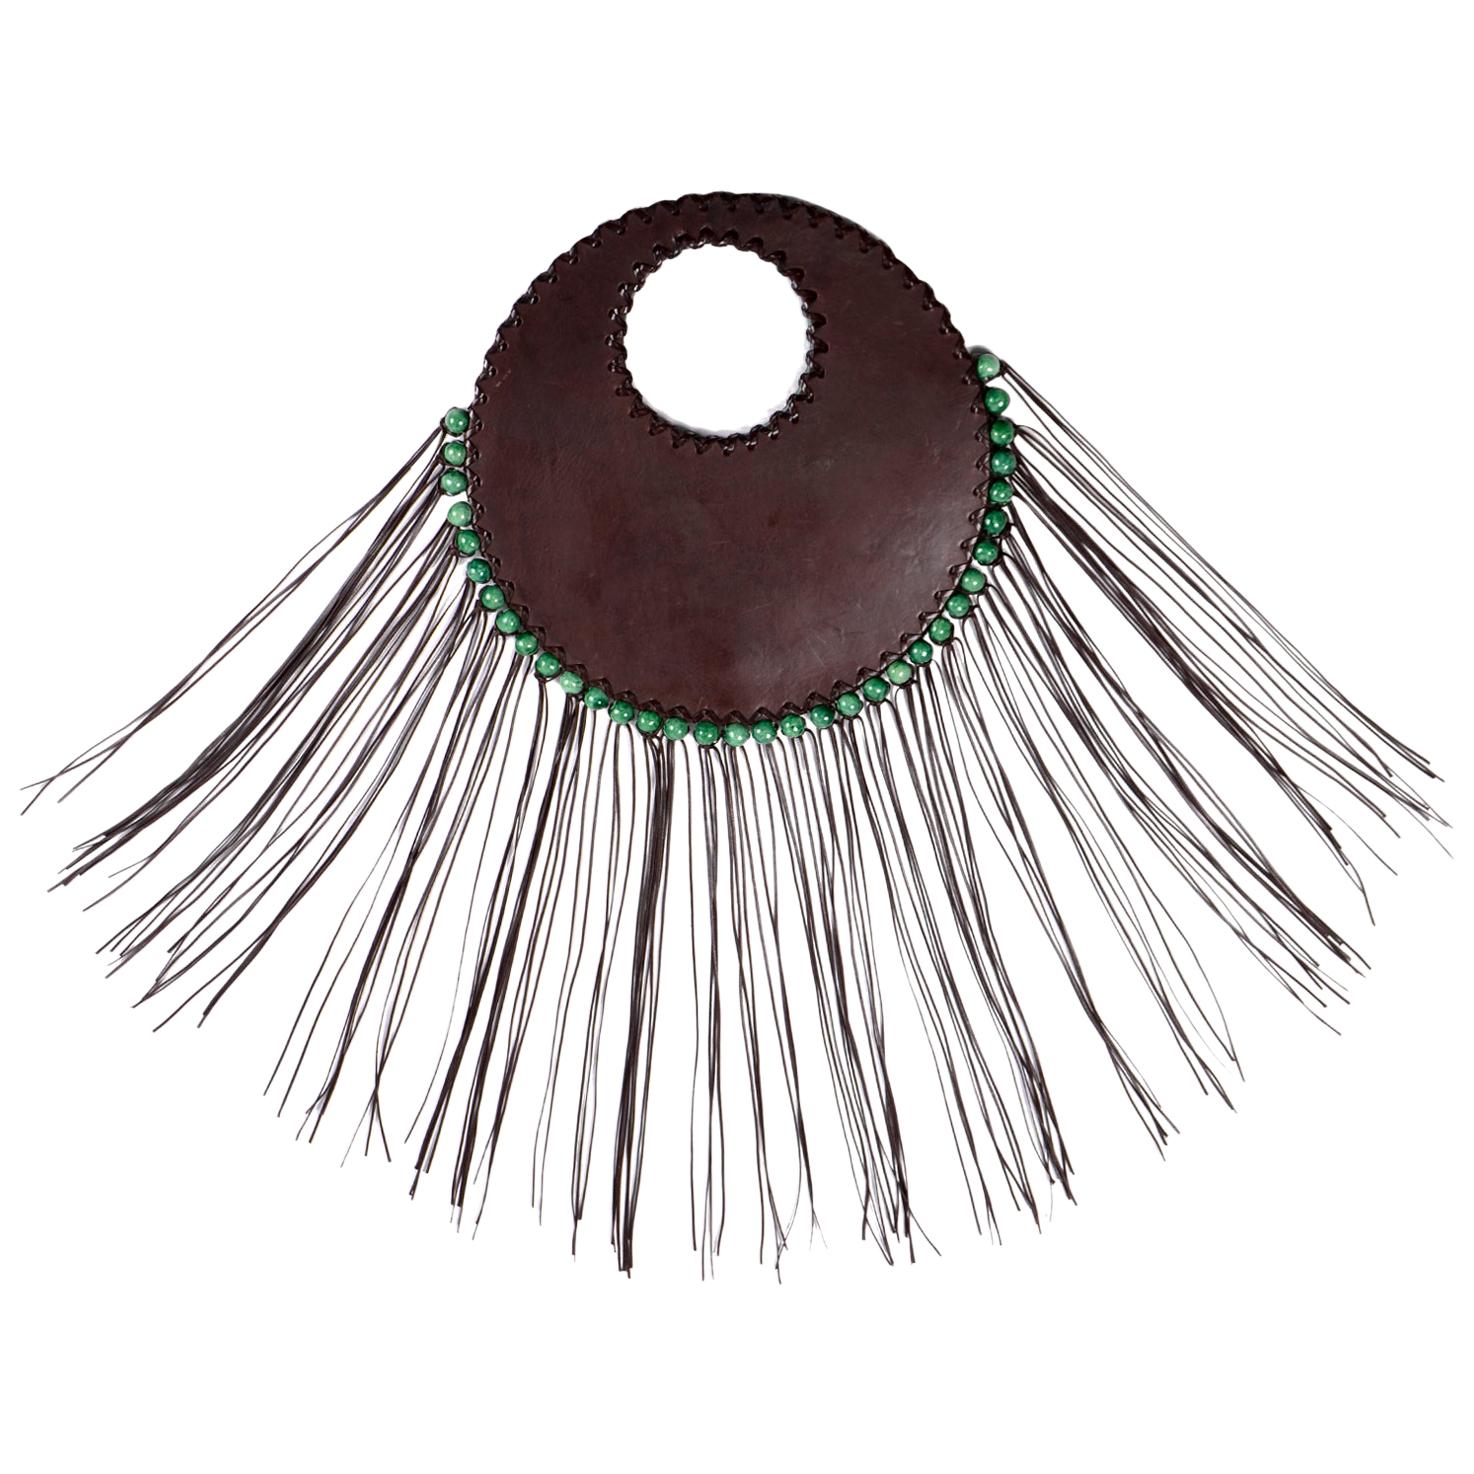 Denise Razzouk Round Brown Leather Handbag With Green Beads and Long Fringe